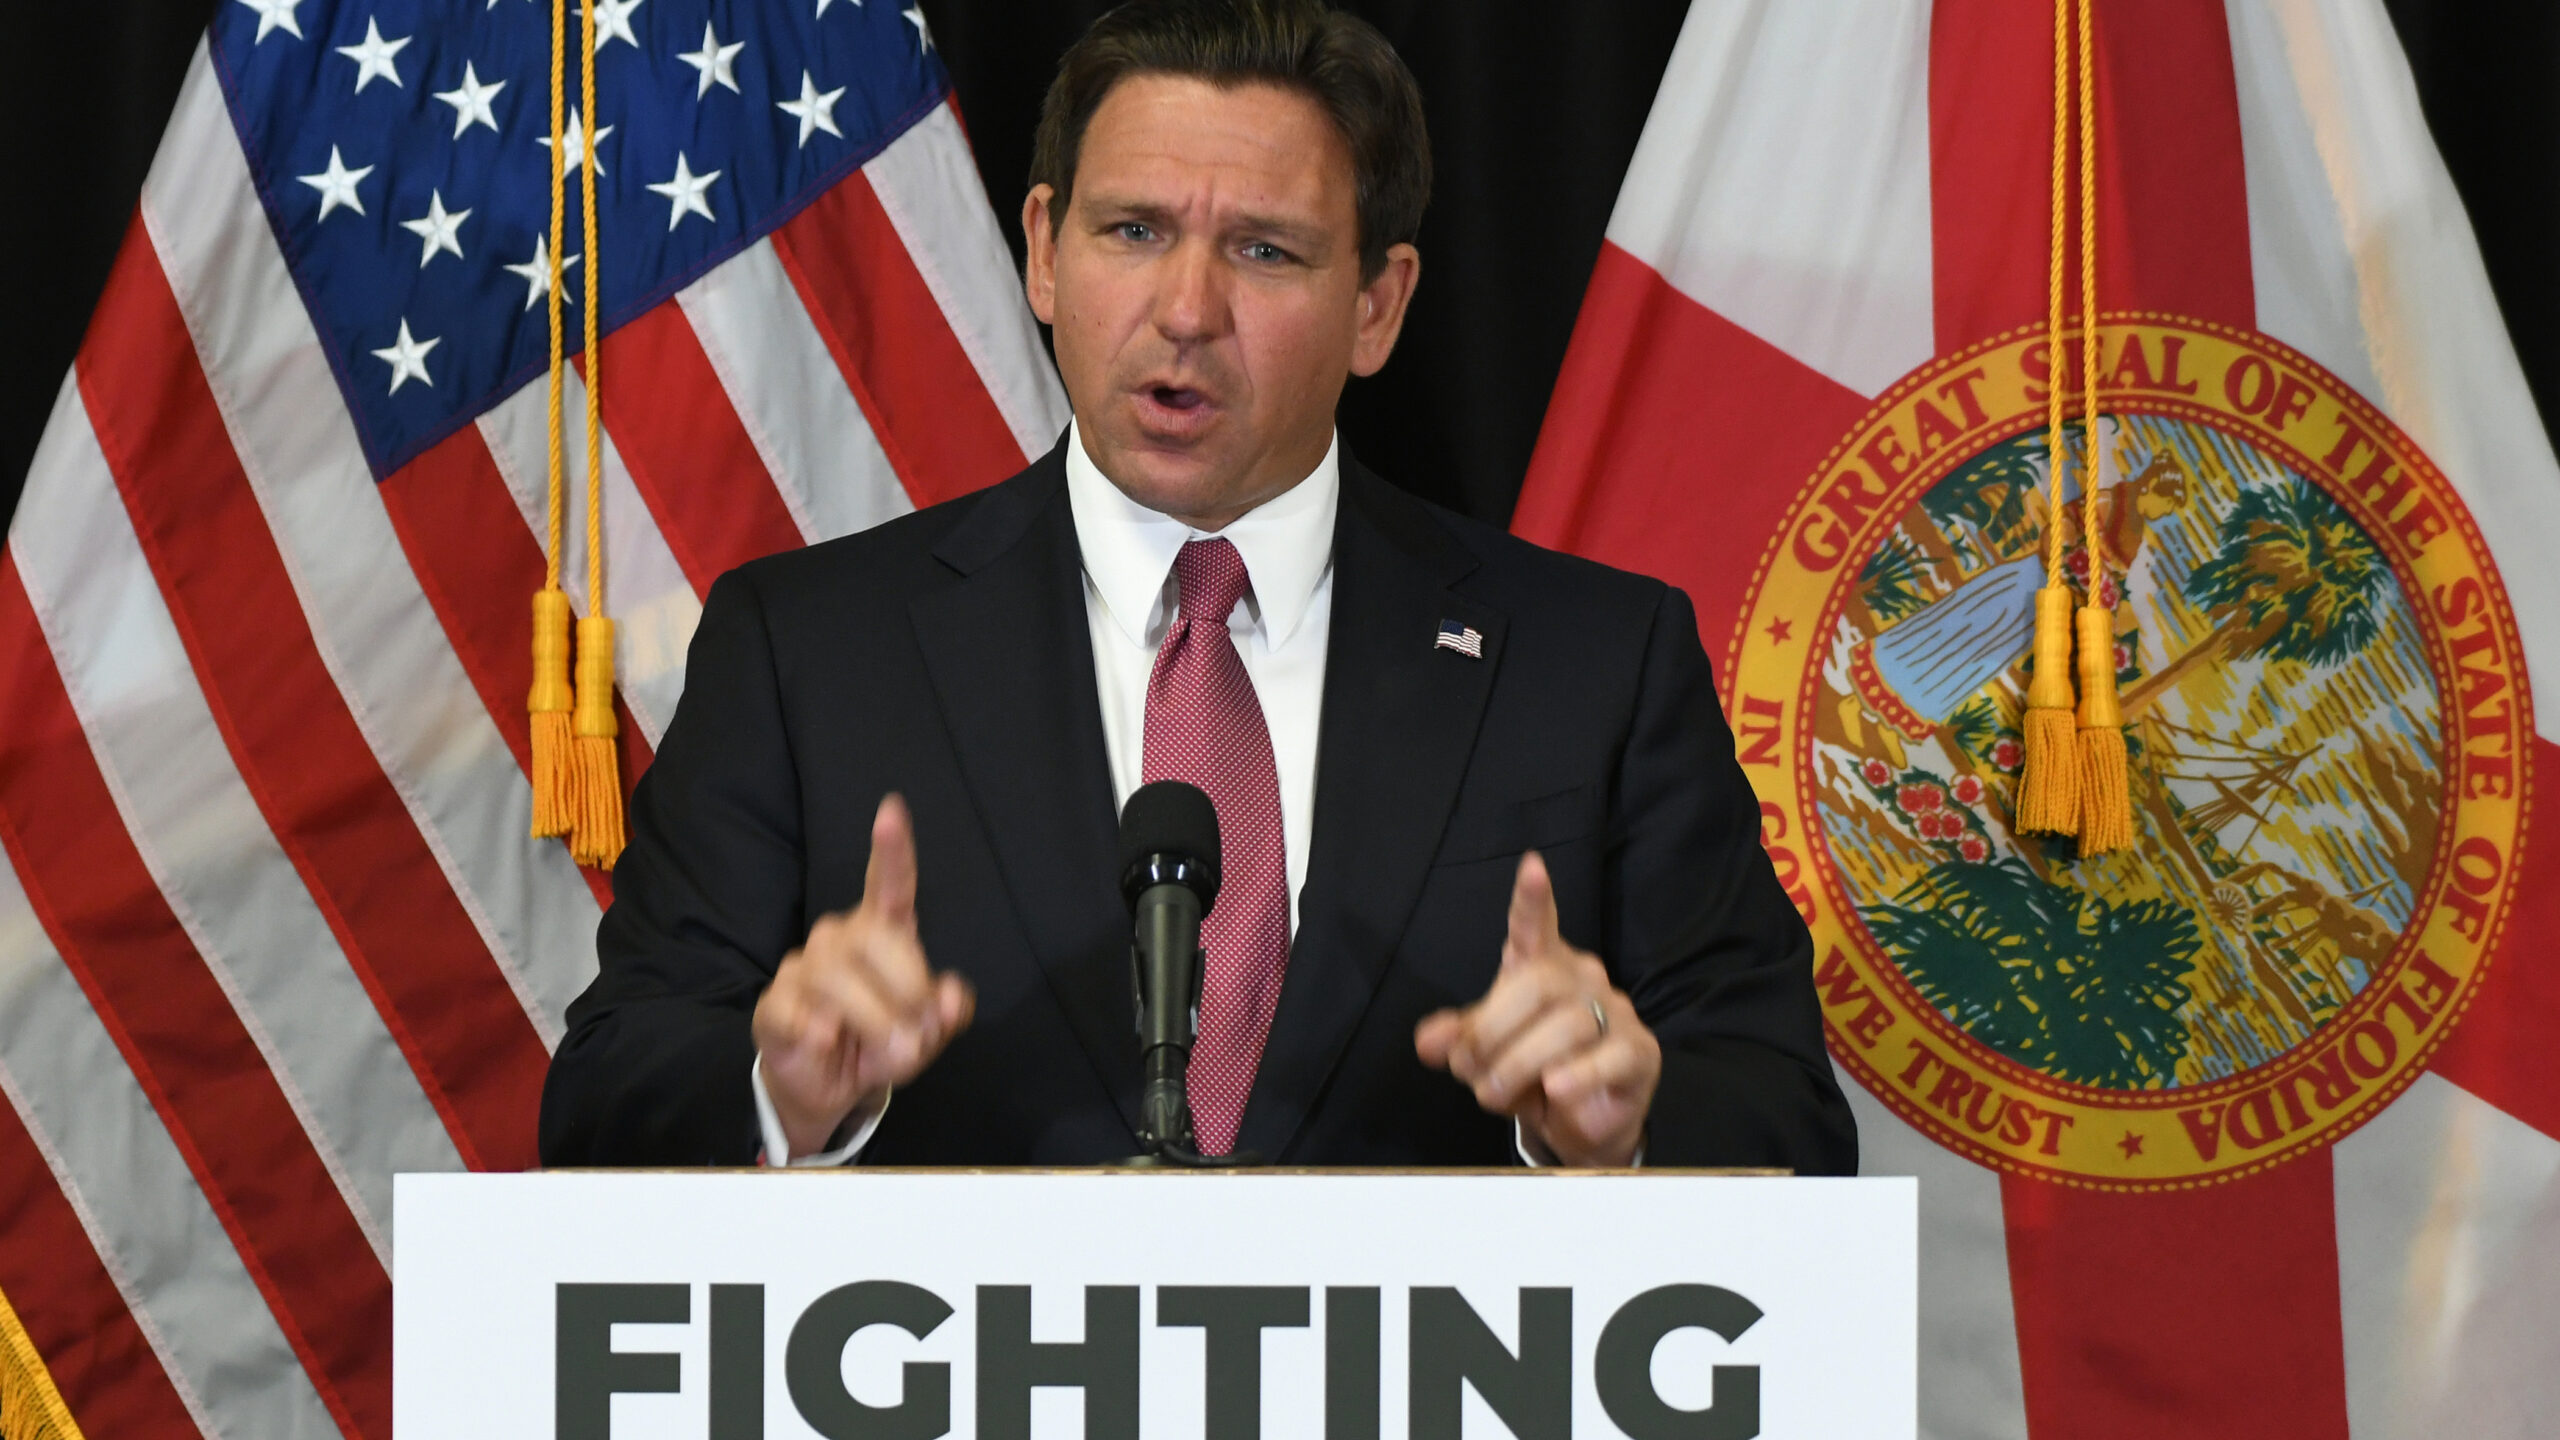 DeSantis condemns anti-Semitic protests at his former school; demands deportation and expulsion of students